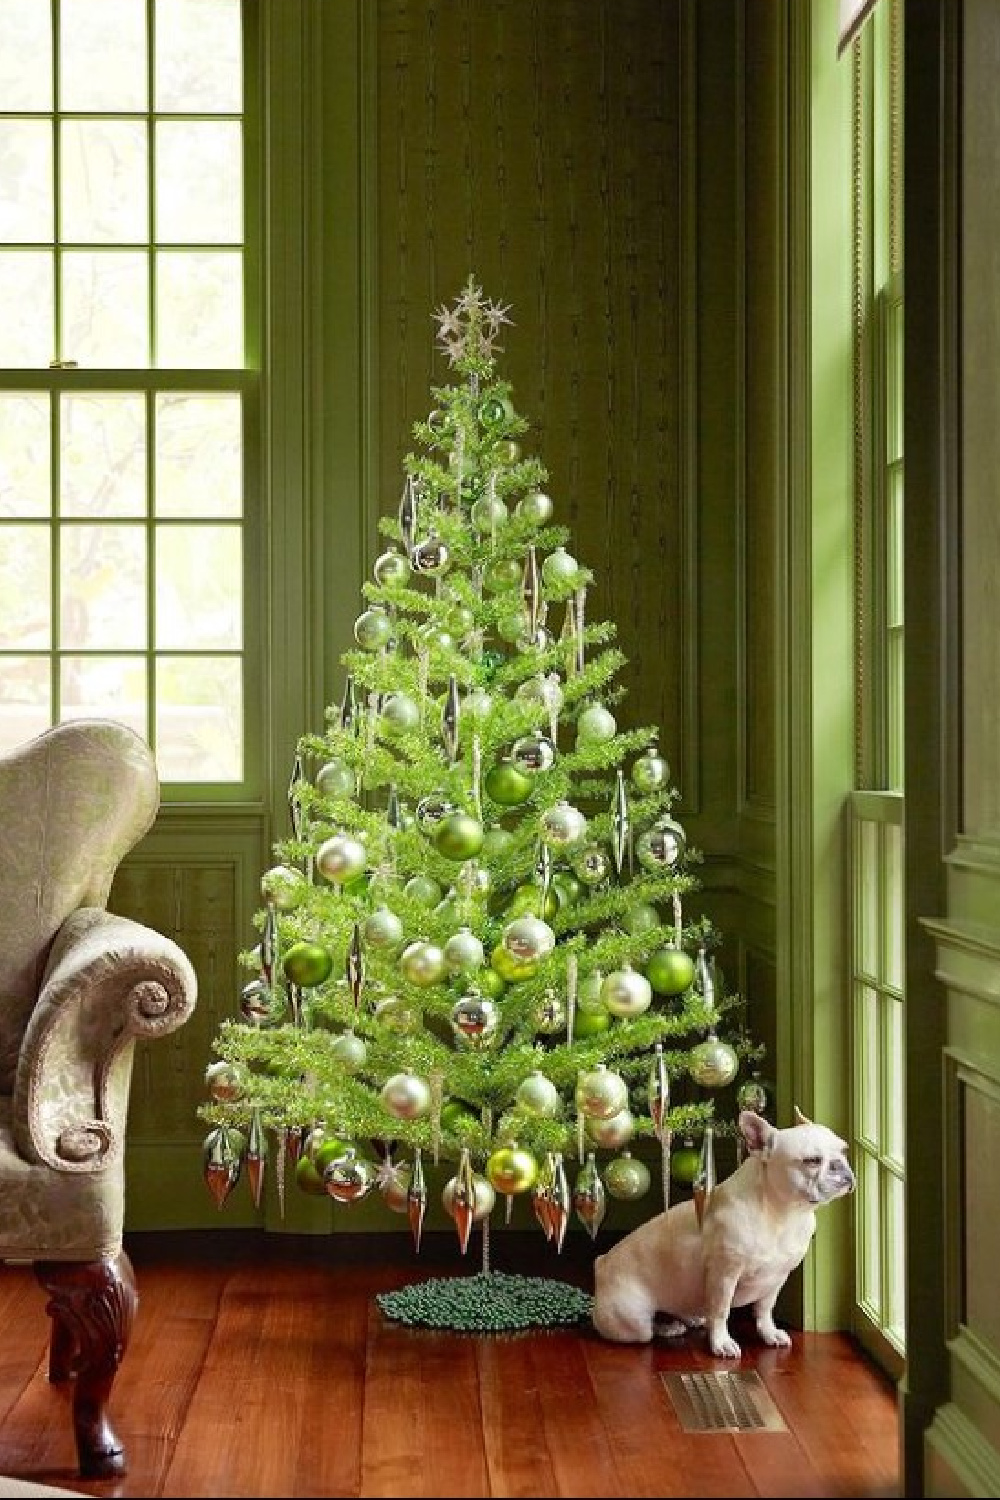 Beautiful green painted paneling in elegant room with Christmas tree and bulldog at window - Martha Stewart (photo by Lucas Allen). #elegantchristmas #traditionalchristmastree